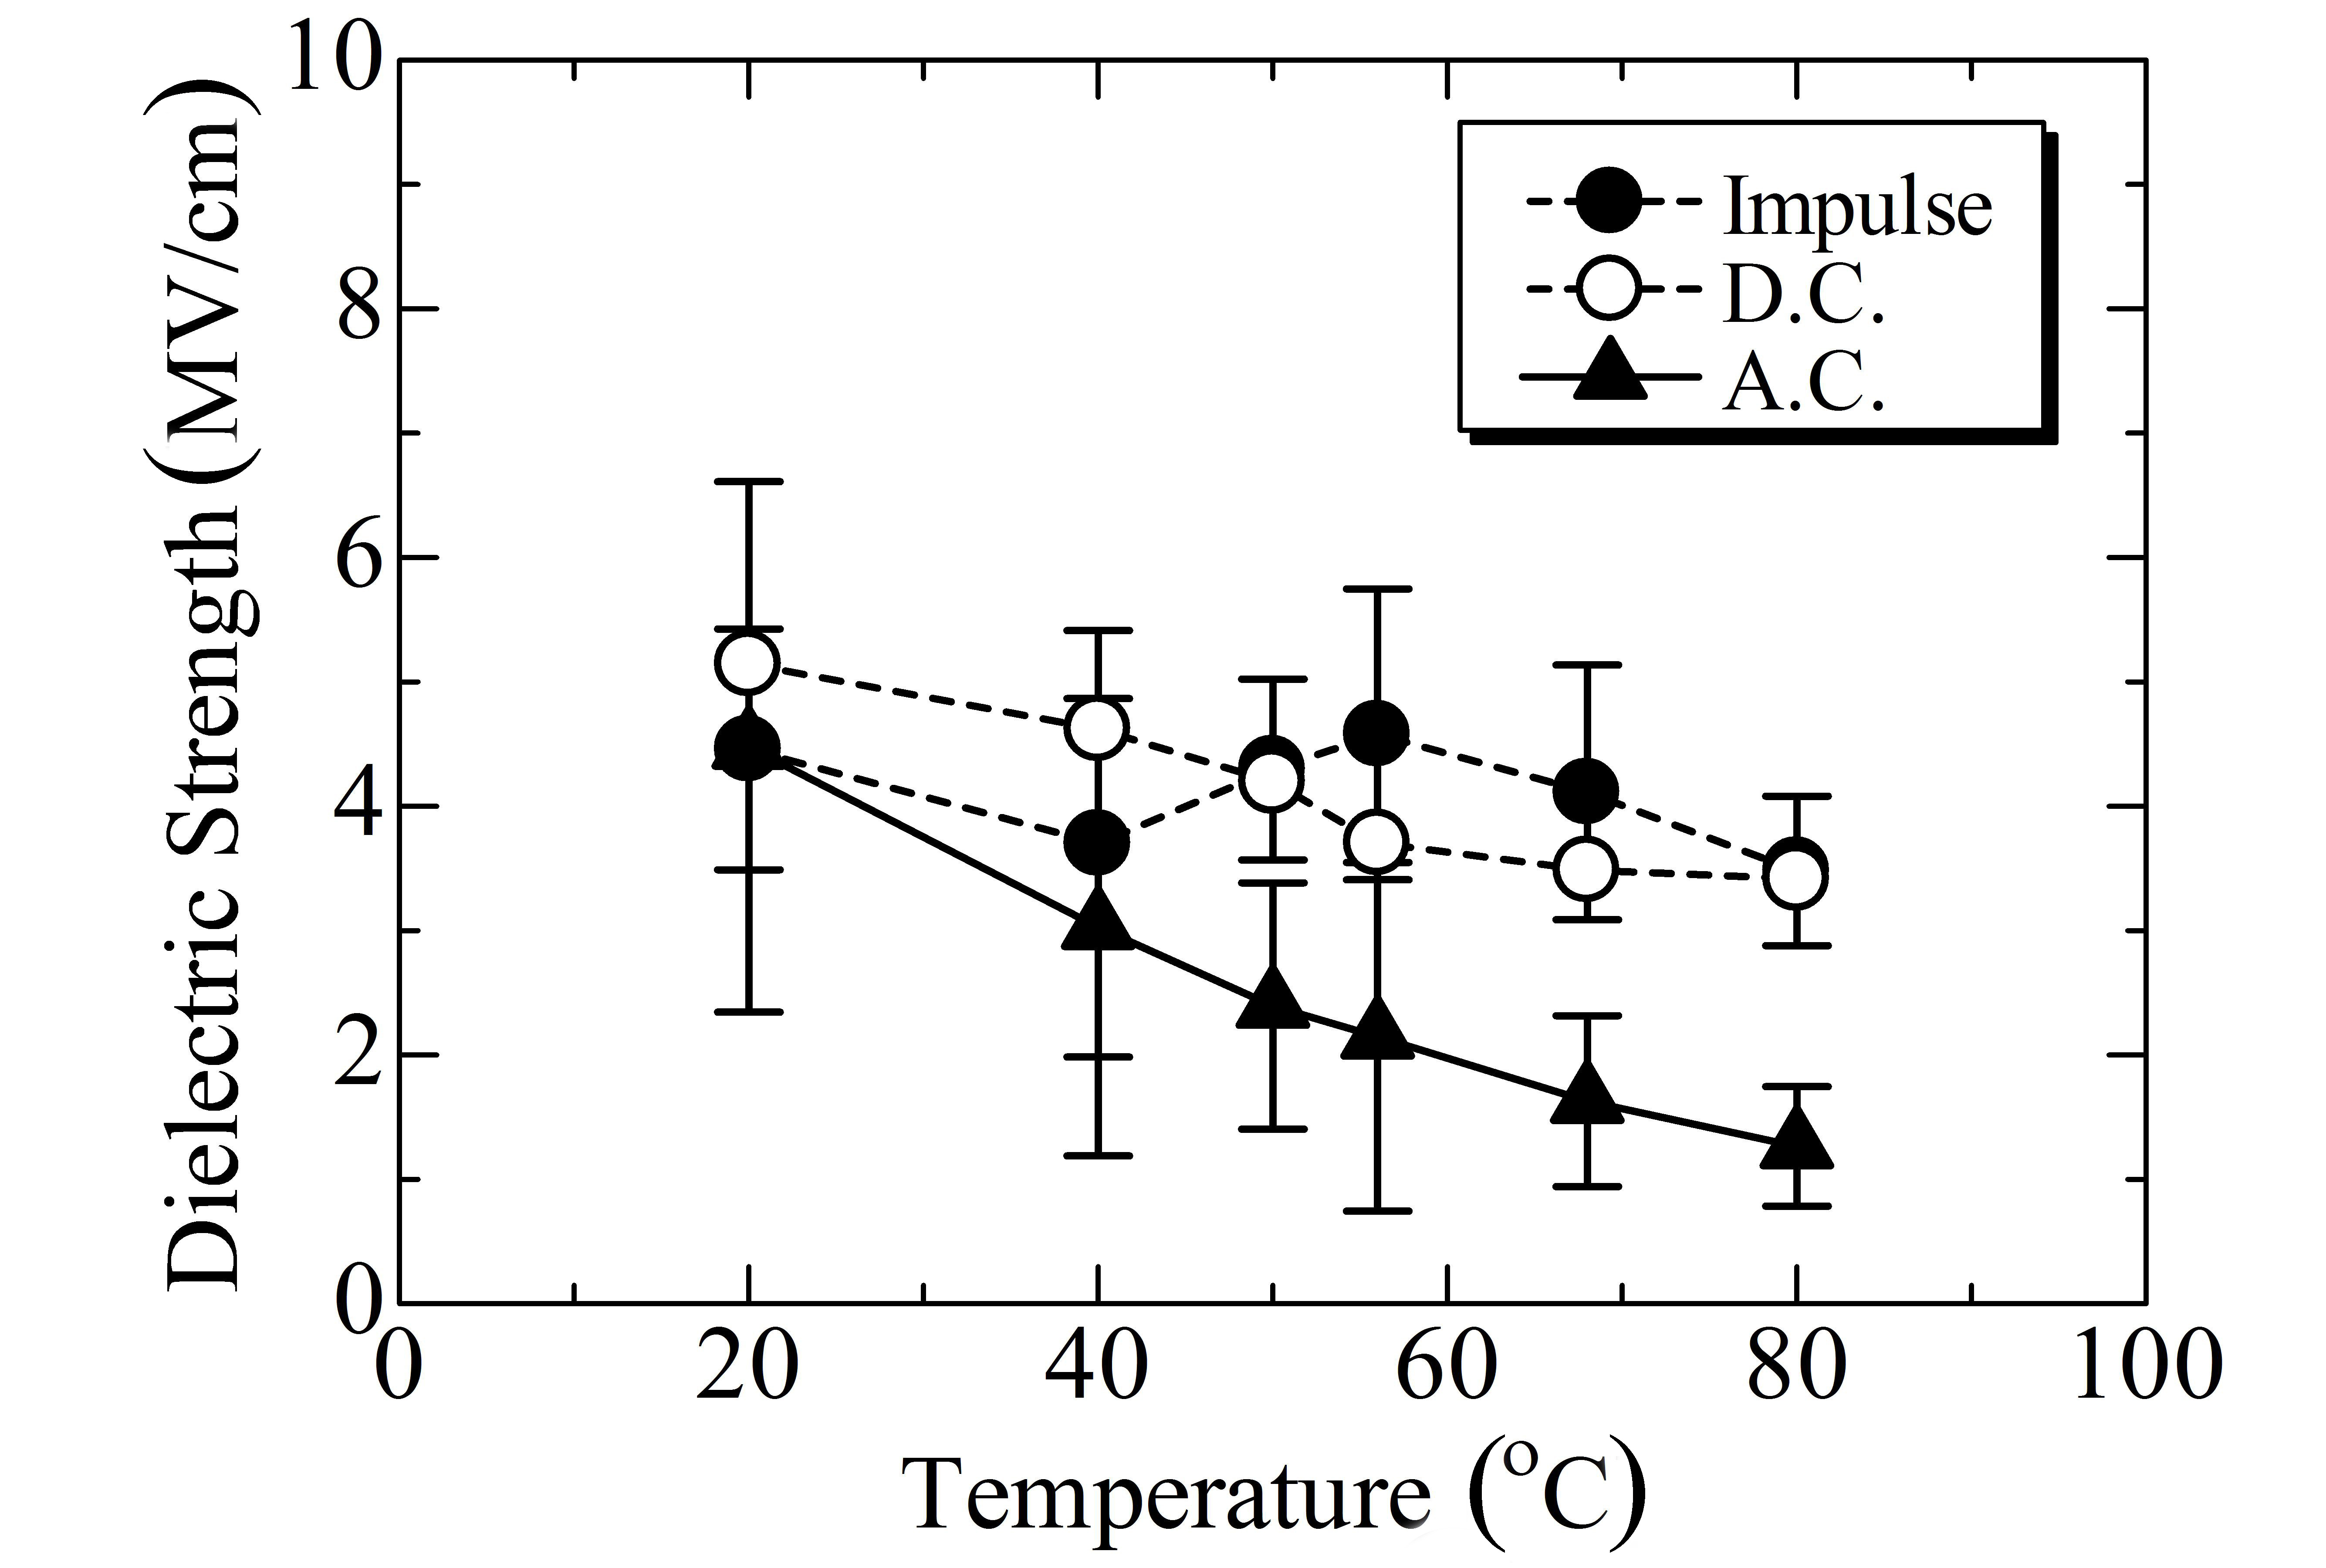 Changes in impulse dc and ac breakdown strengths as afunction of temperature measured for poly-L-lactic acid (PLLA) andpolyethylene terephthalate succinate (PETS). (a) PLLA (b) PETS.